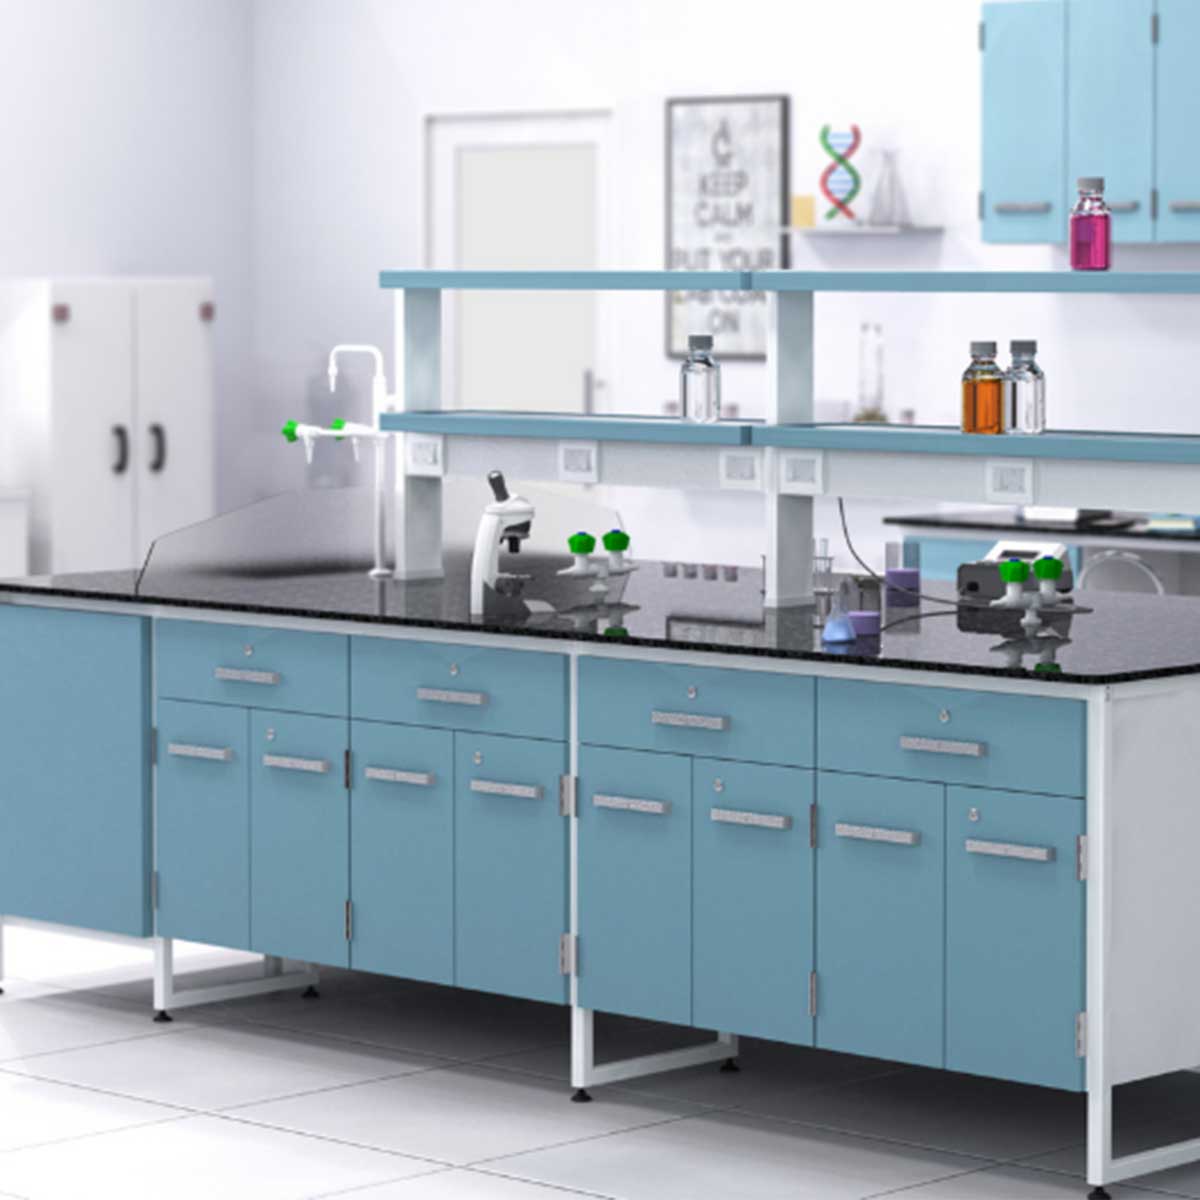 Laboratory Workstation Manufacturers, Suppliers, Exporters in Delhi 